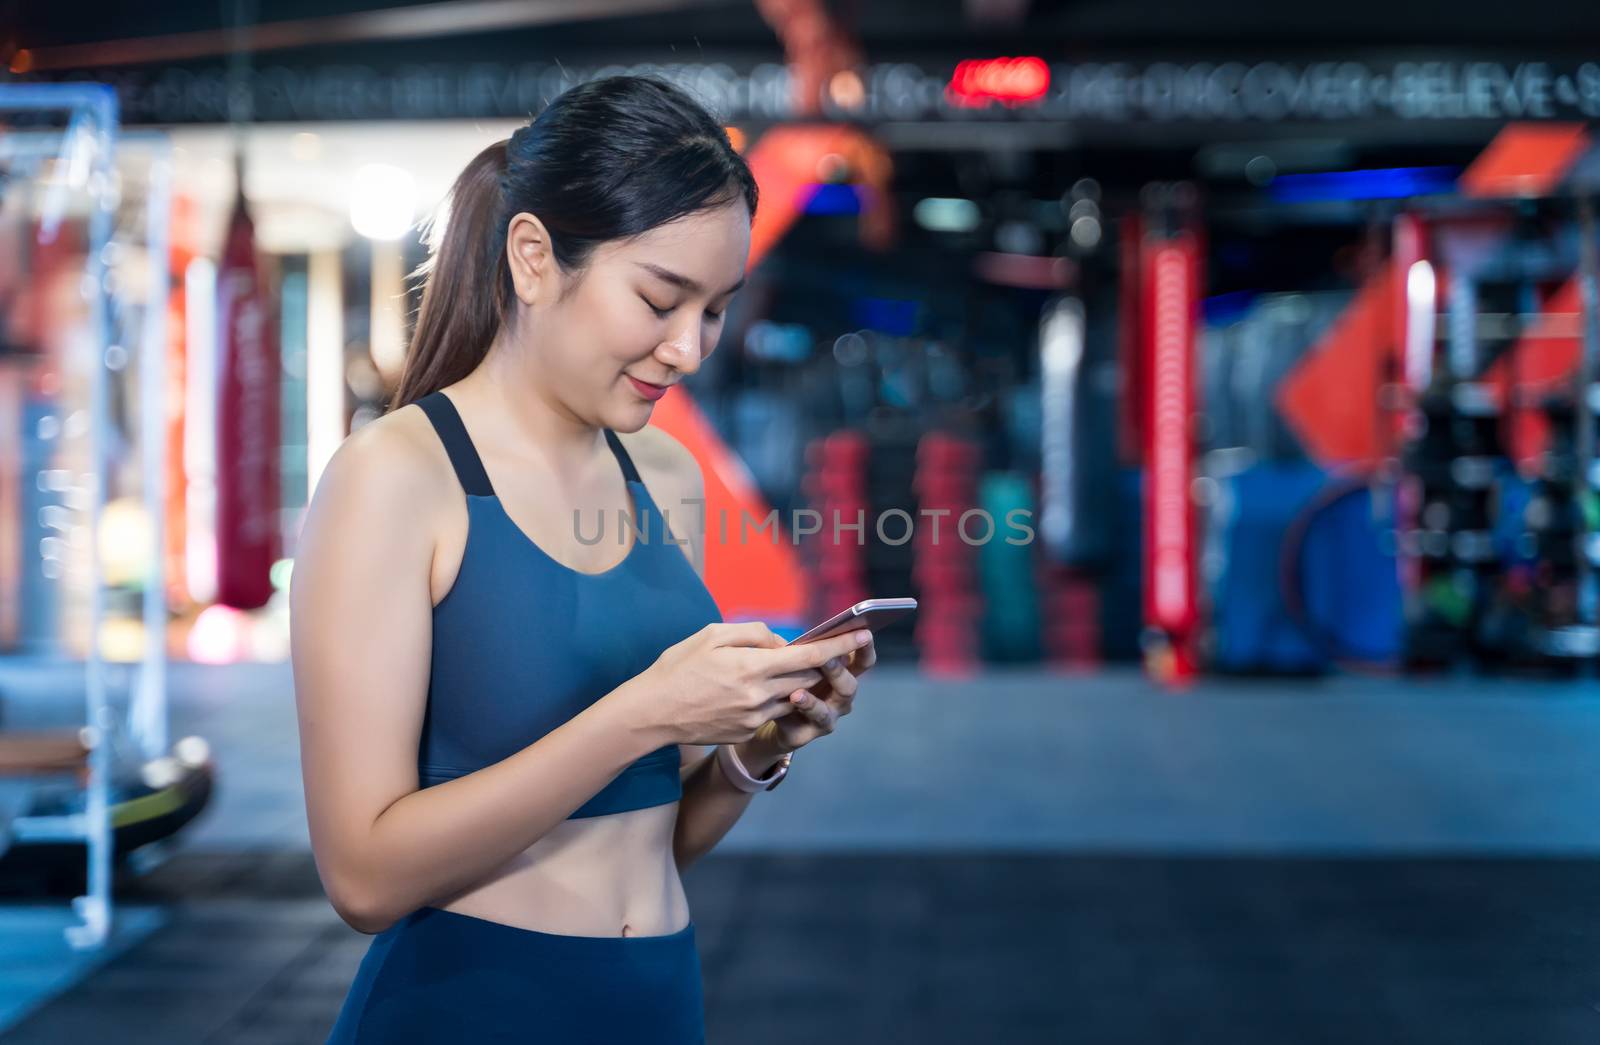 Asian Women are using mobile phones during exercise. She's stand by Boophuket